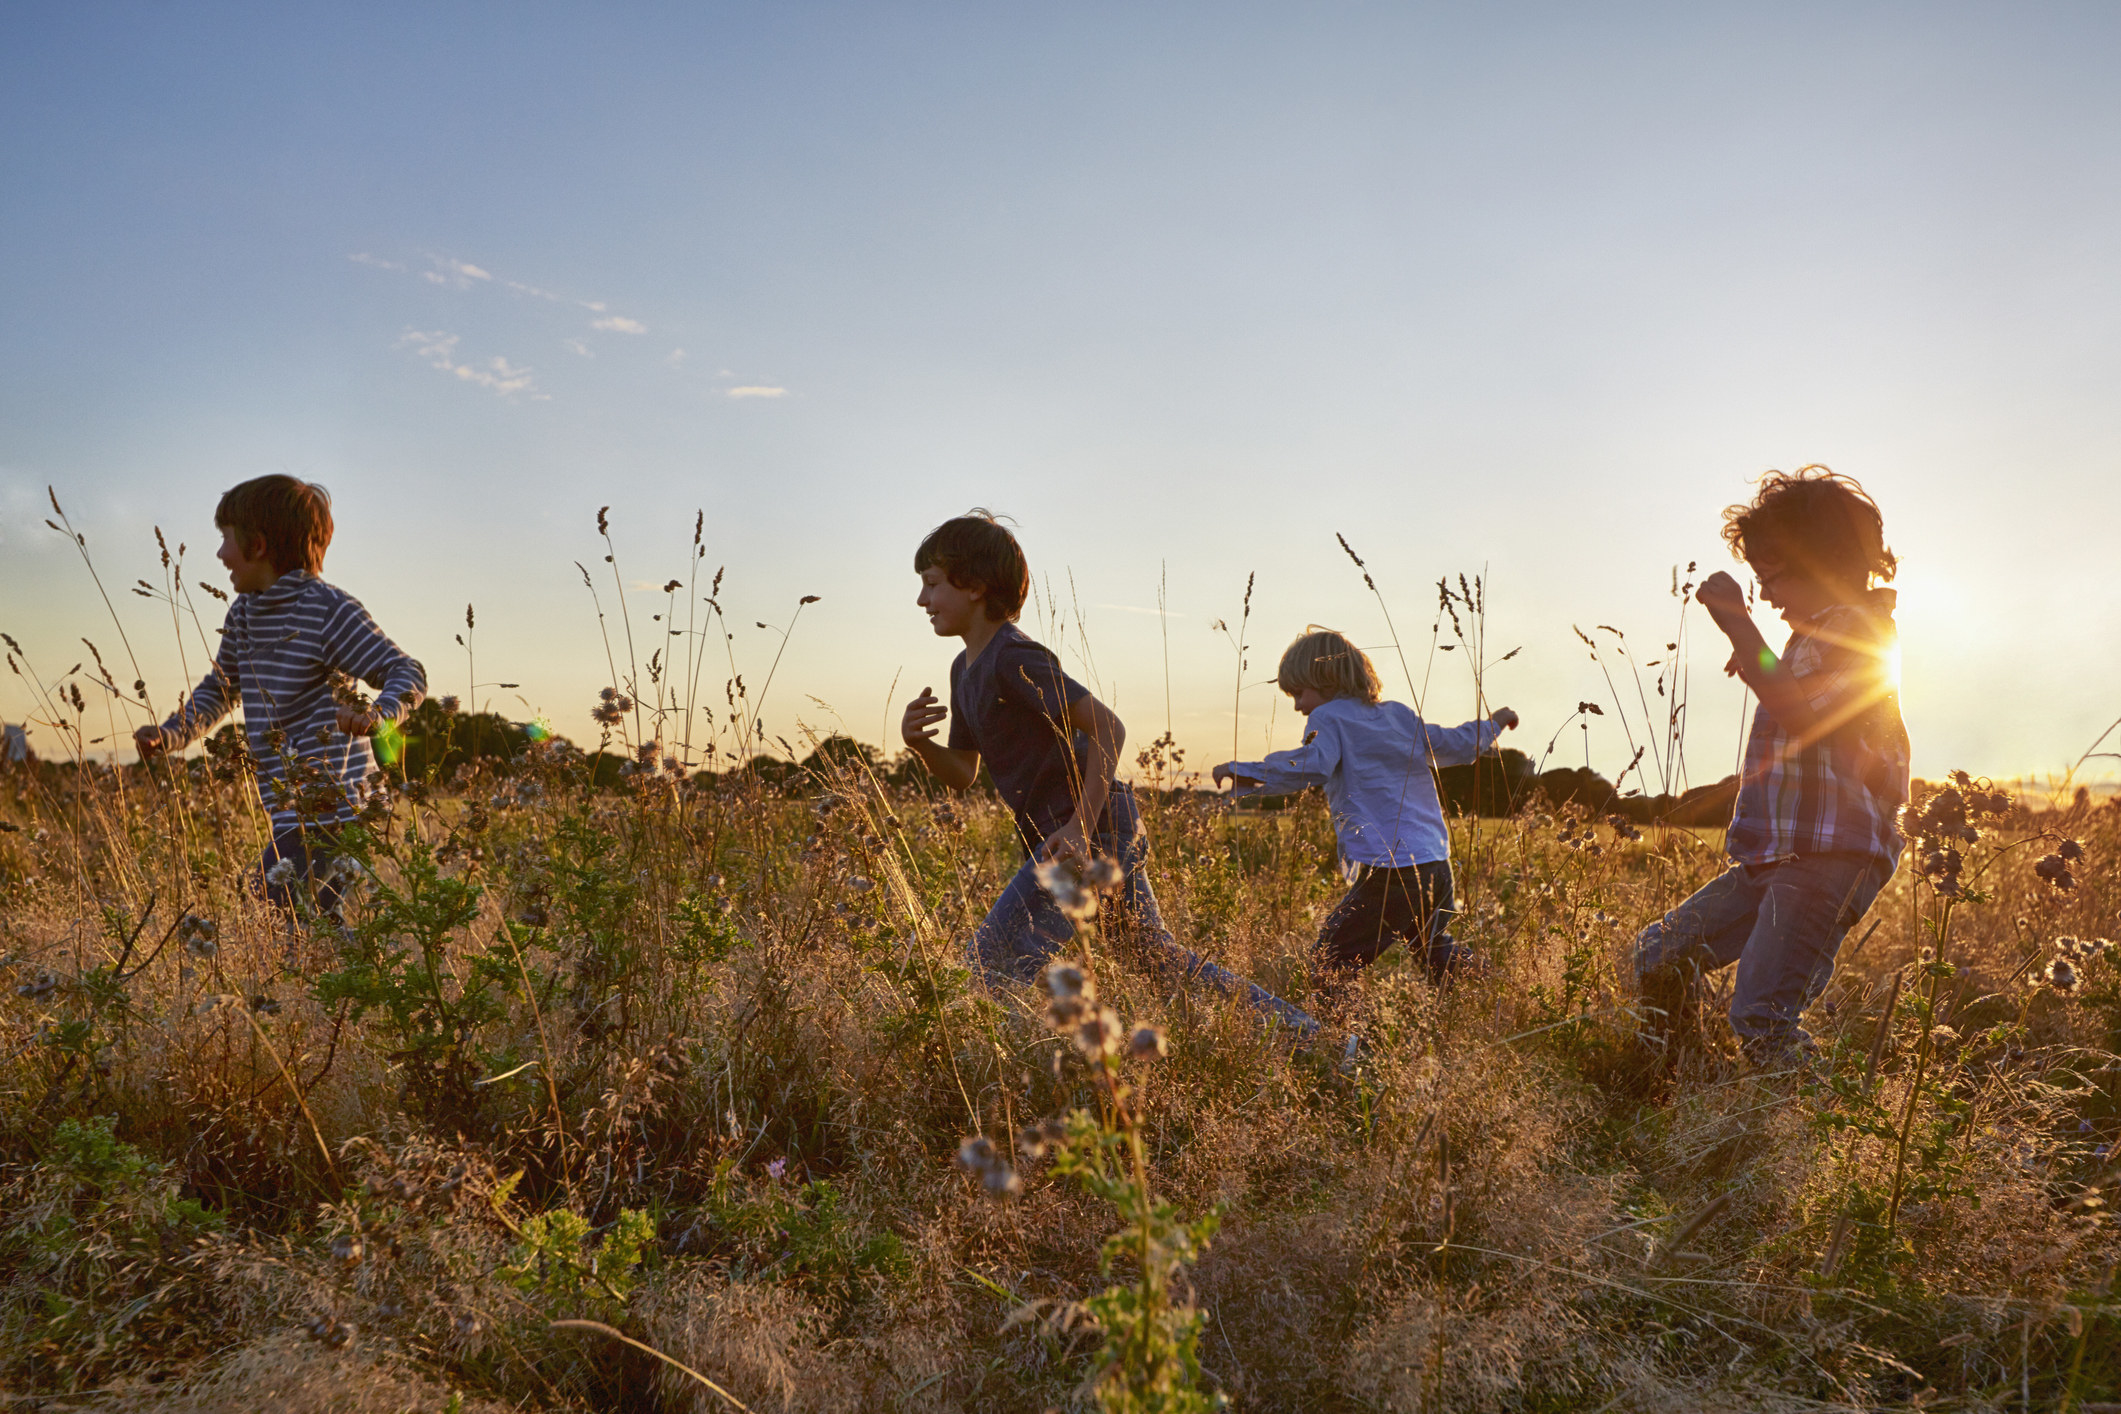 Kids playing in a field